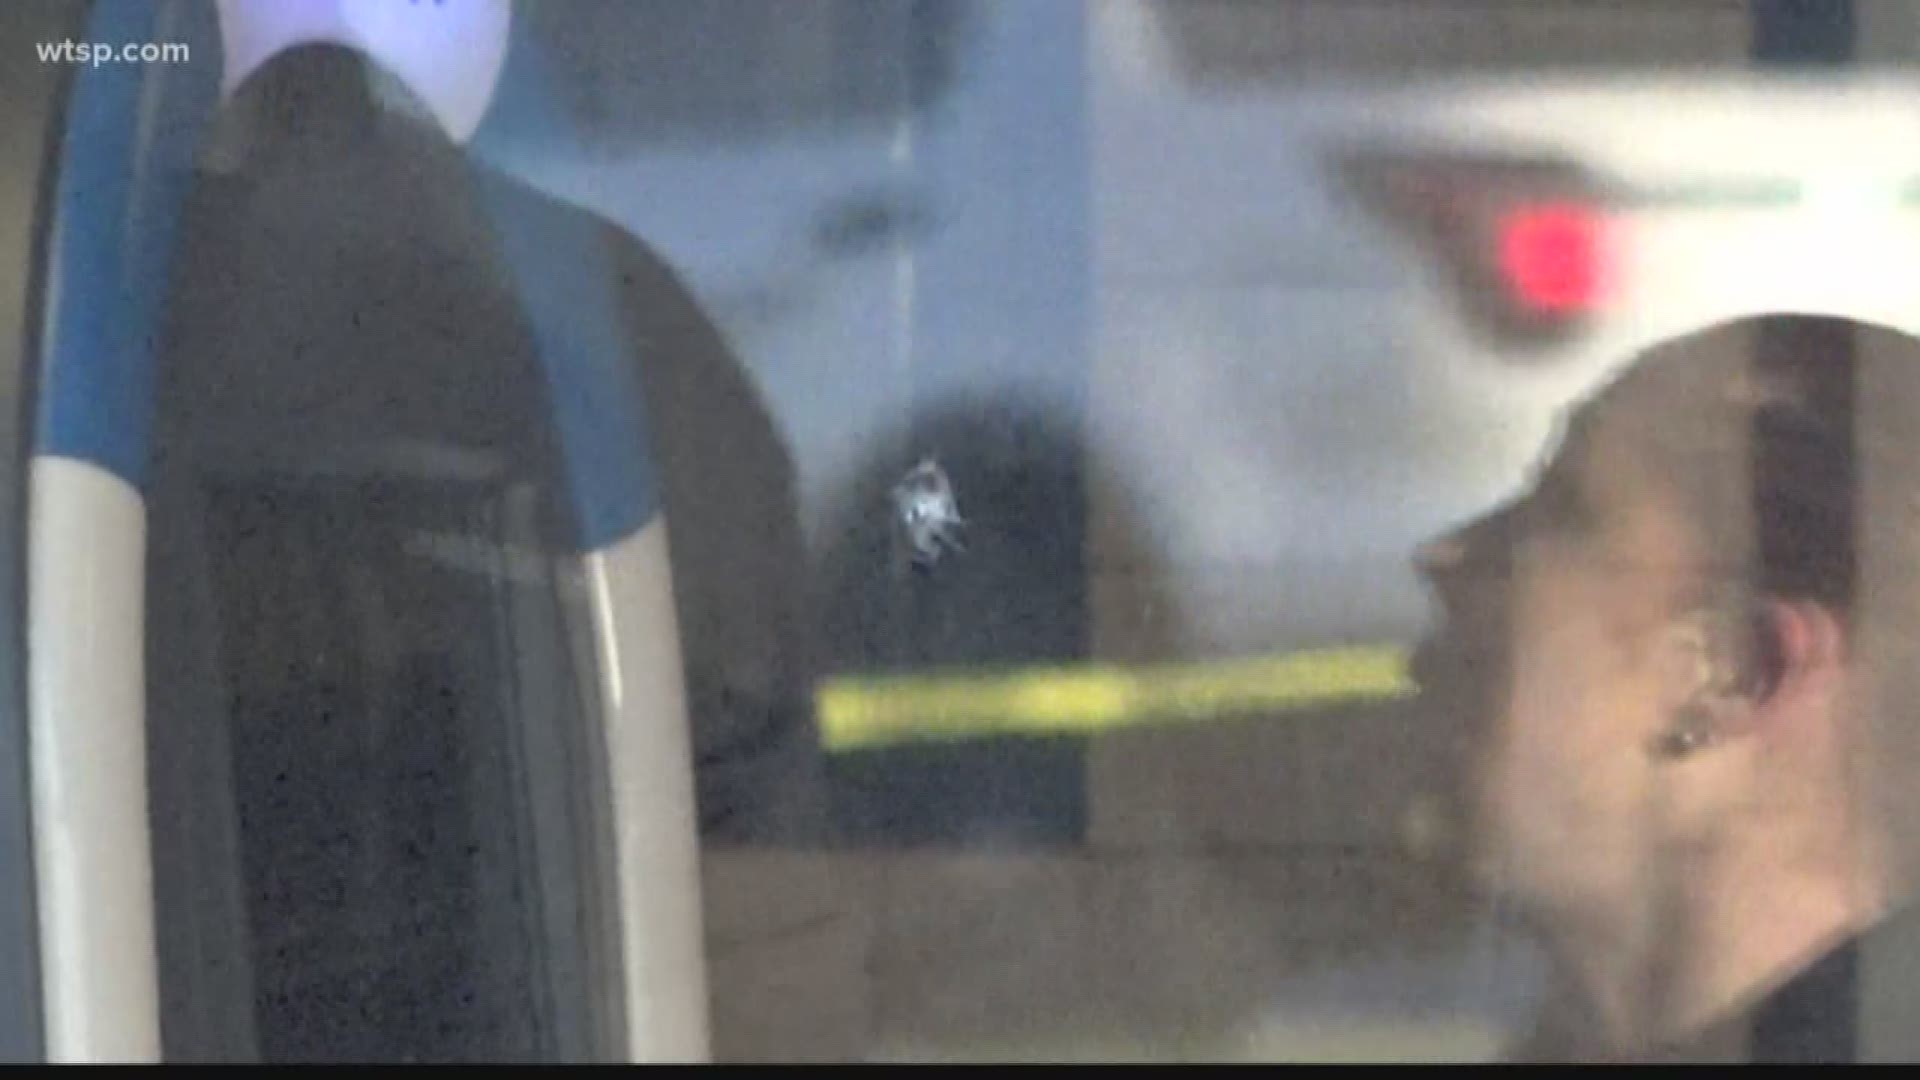 Officials believe someone fired a pellet gun through the window, hitting the cook.